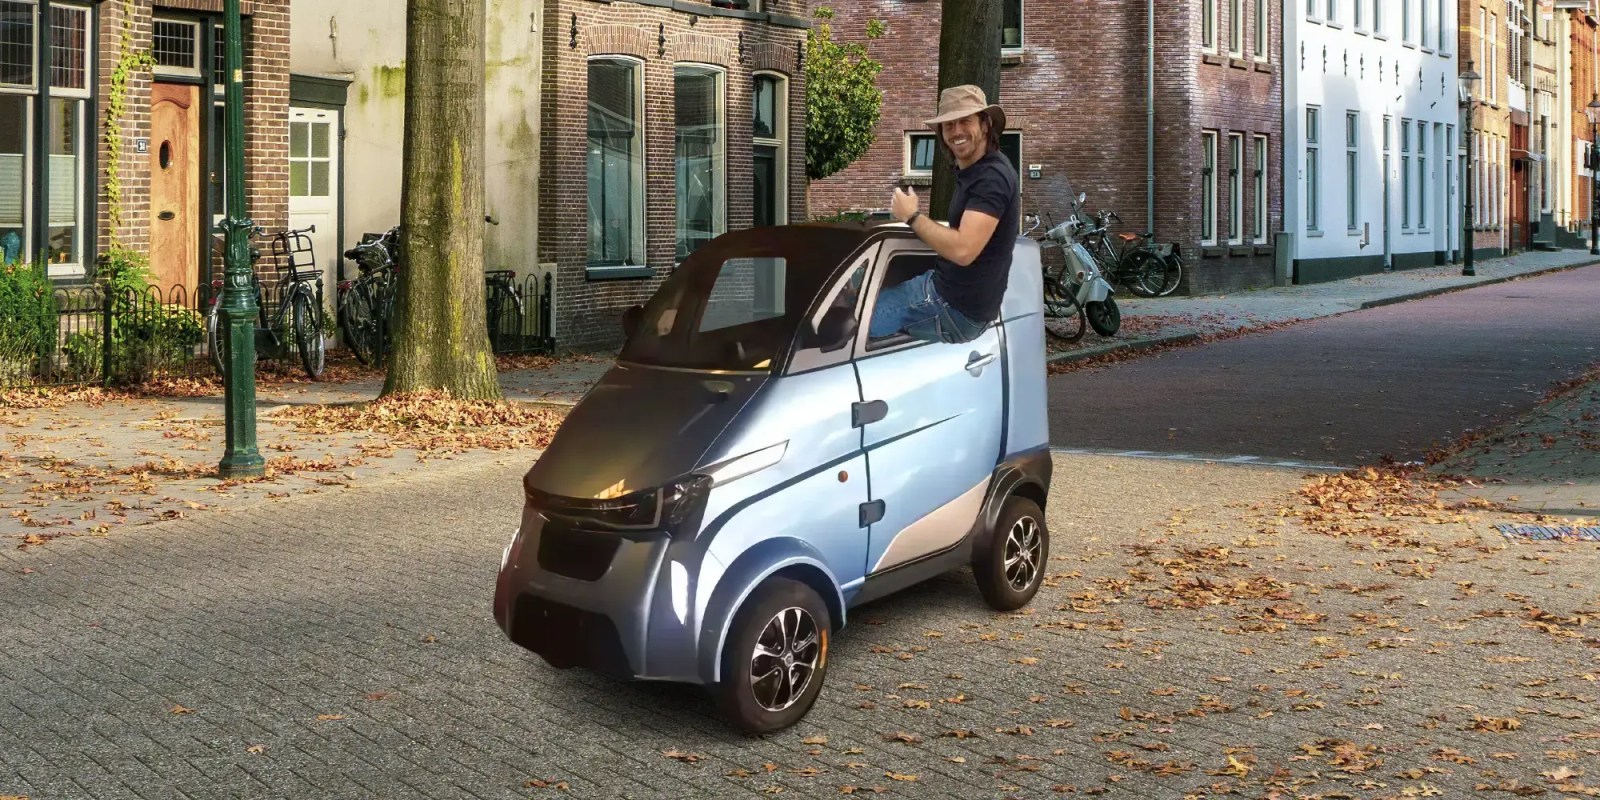 Meet the world’s cutest and tiniest electric delivery van